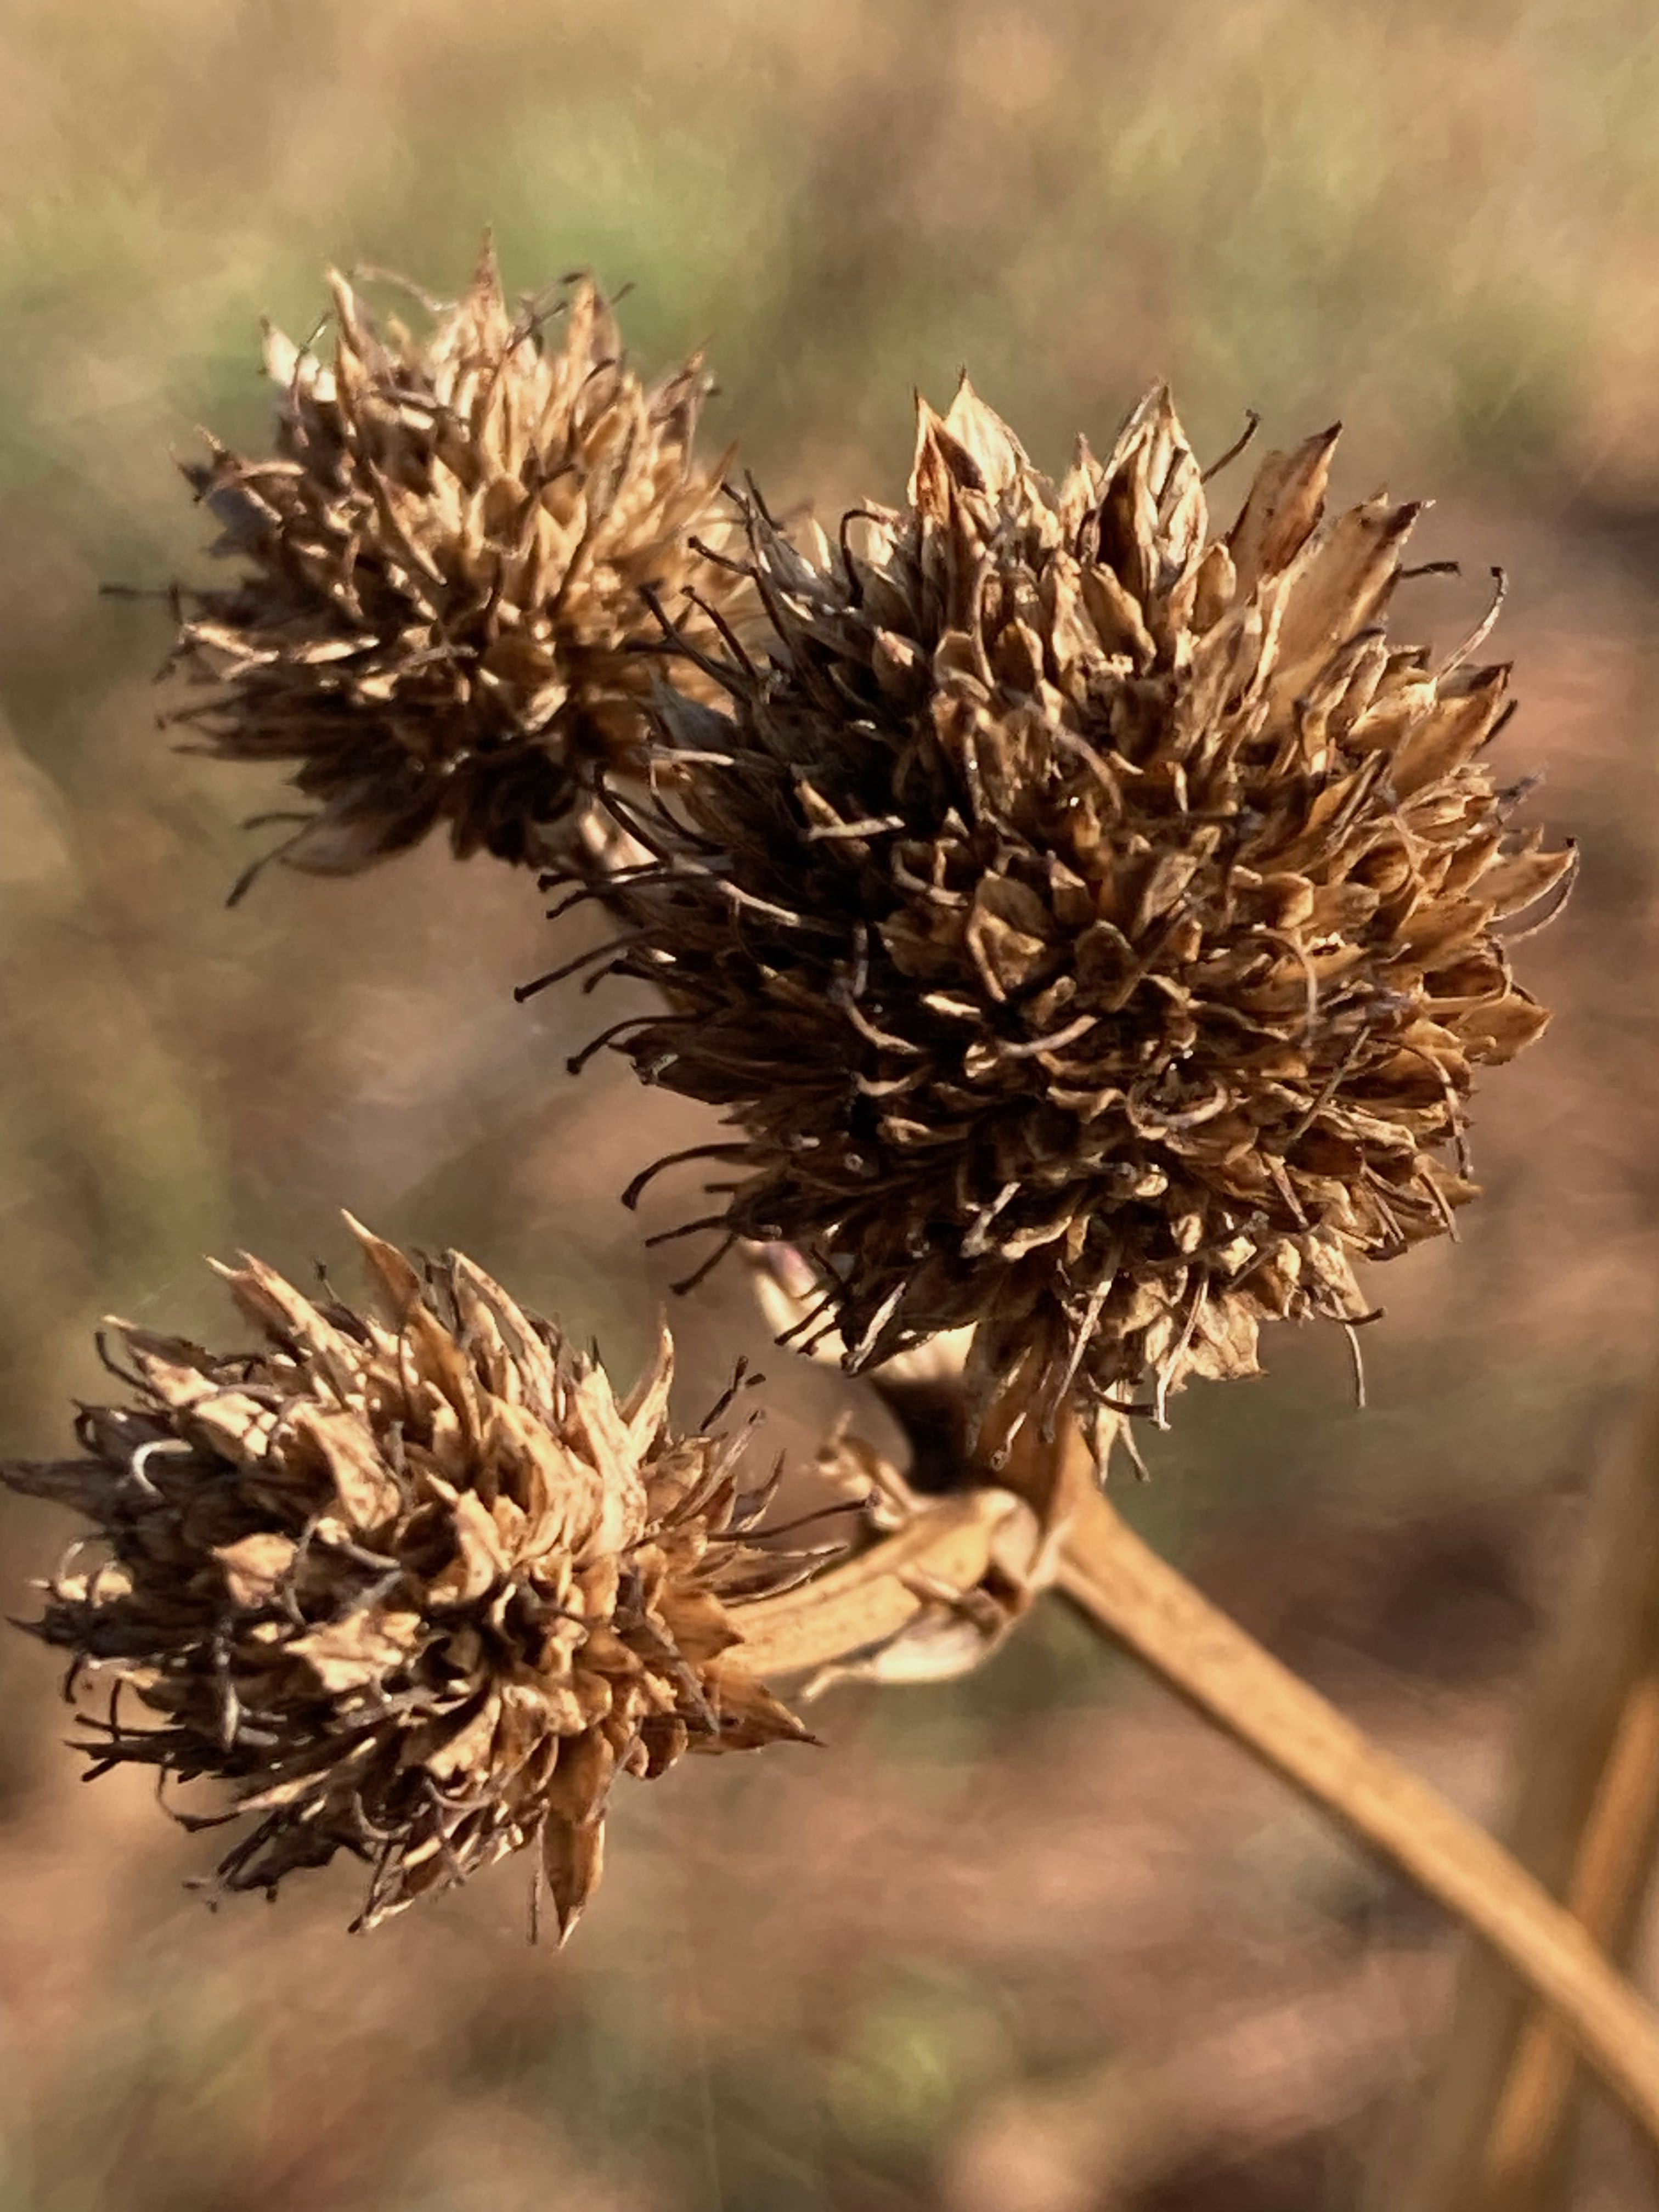 The Scientific Name is Eryngium yuccifolium. You will likely hear them called Rattlesnake-master, Button Eryngo. This picture shows the End of the season flowering stalk with dried umbels. of Eryngium yuccifolium